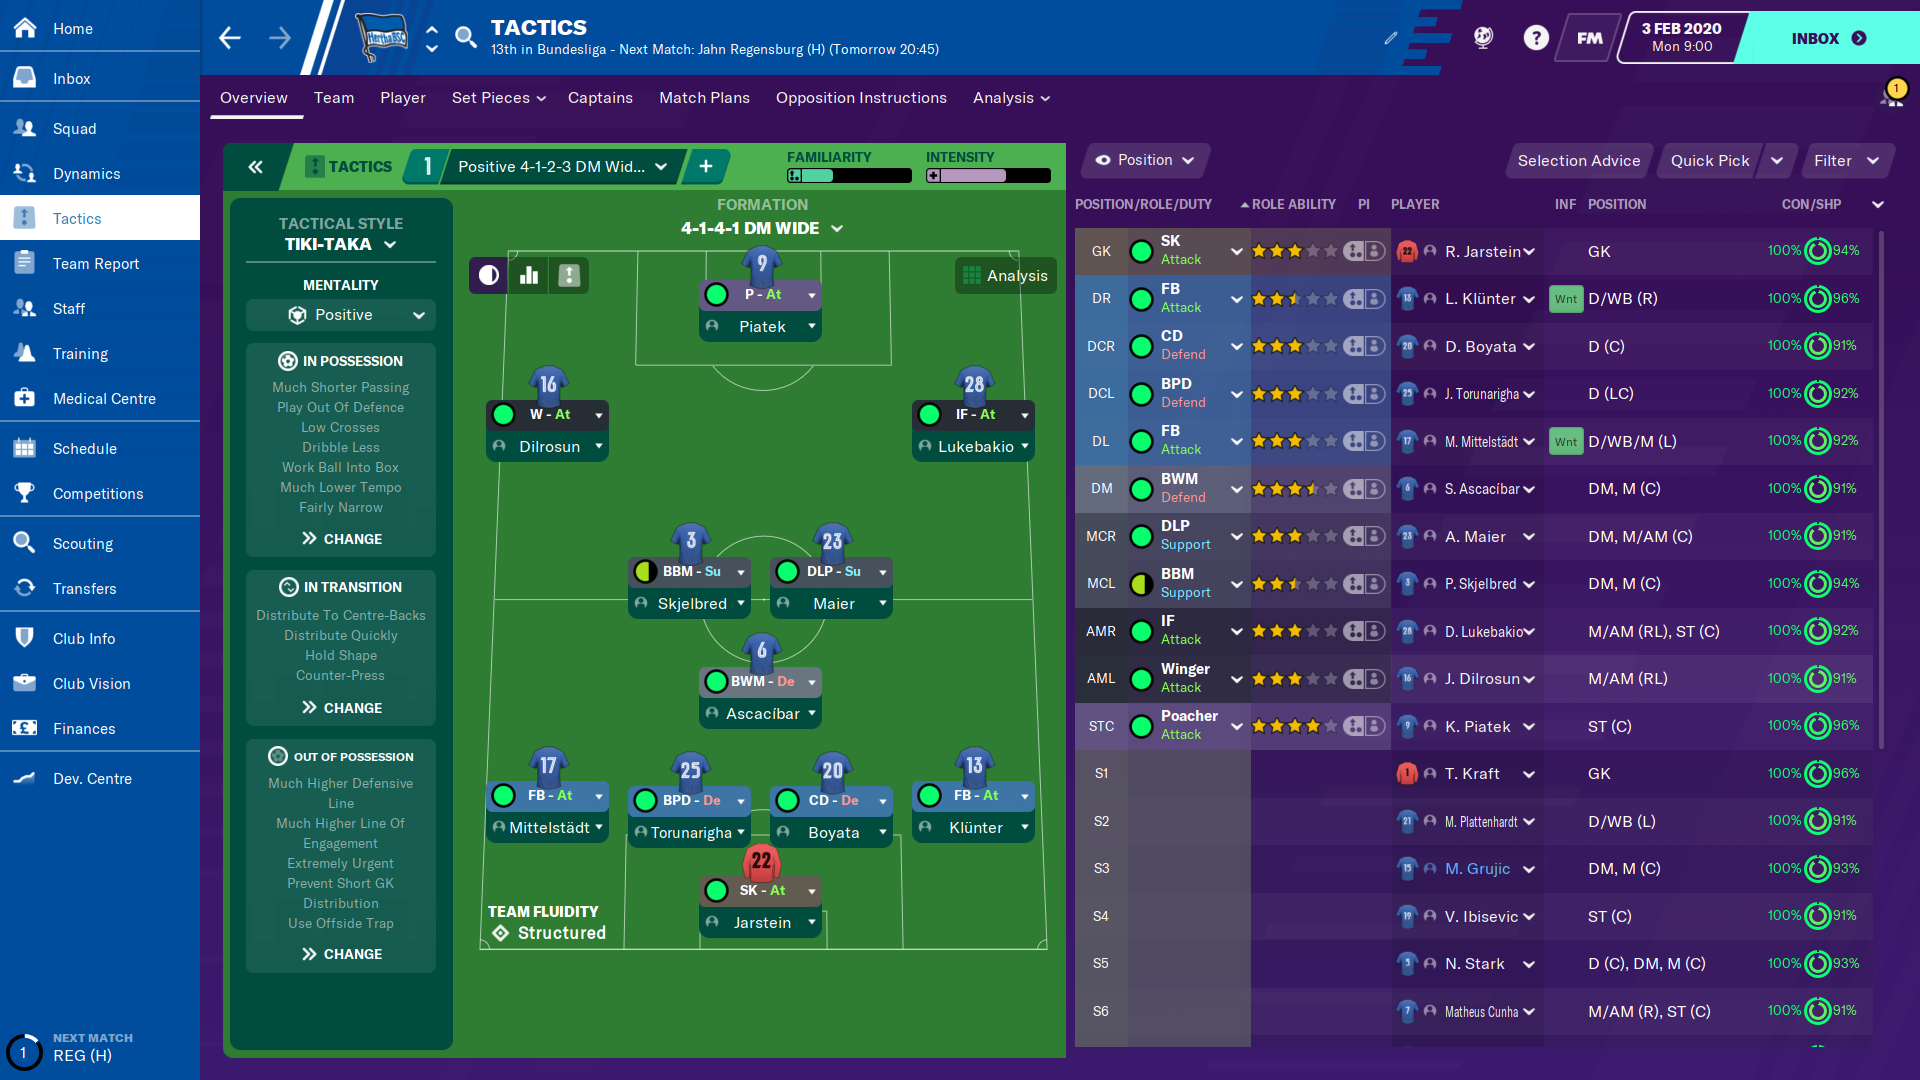 Hertha Berlin in Football Manager 2020